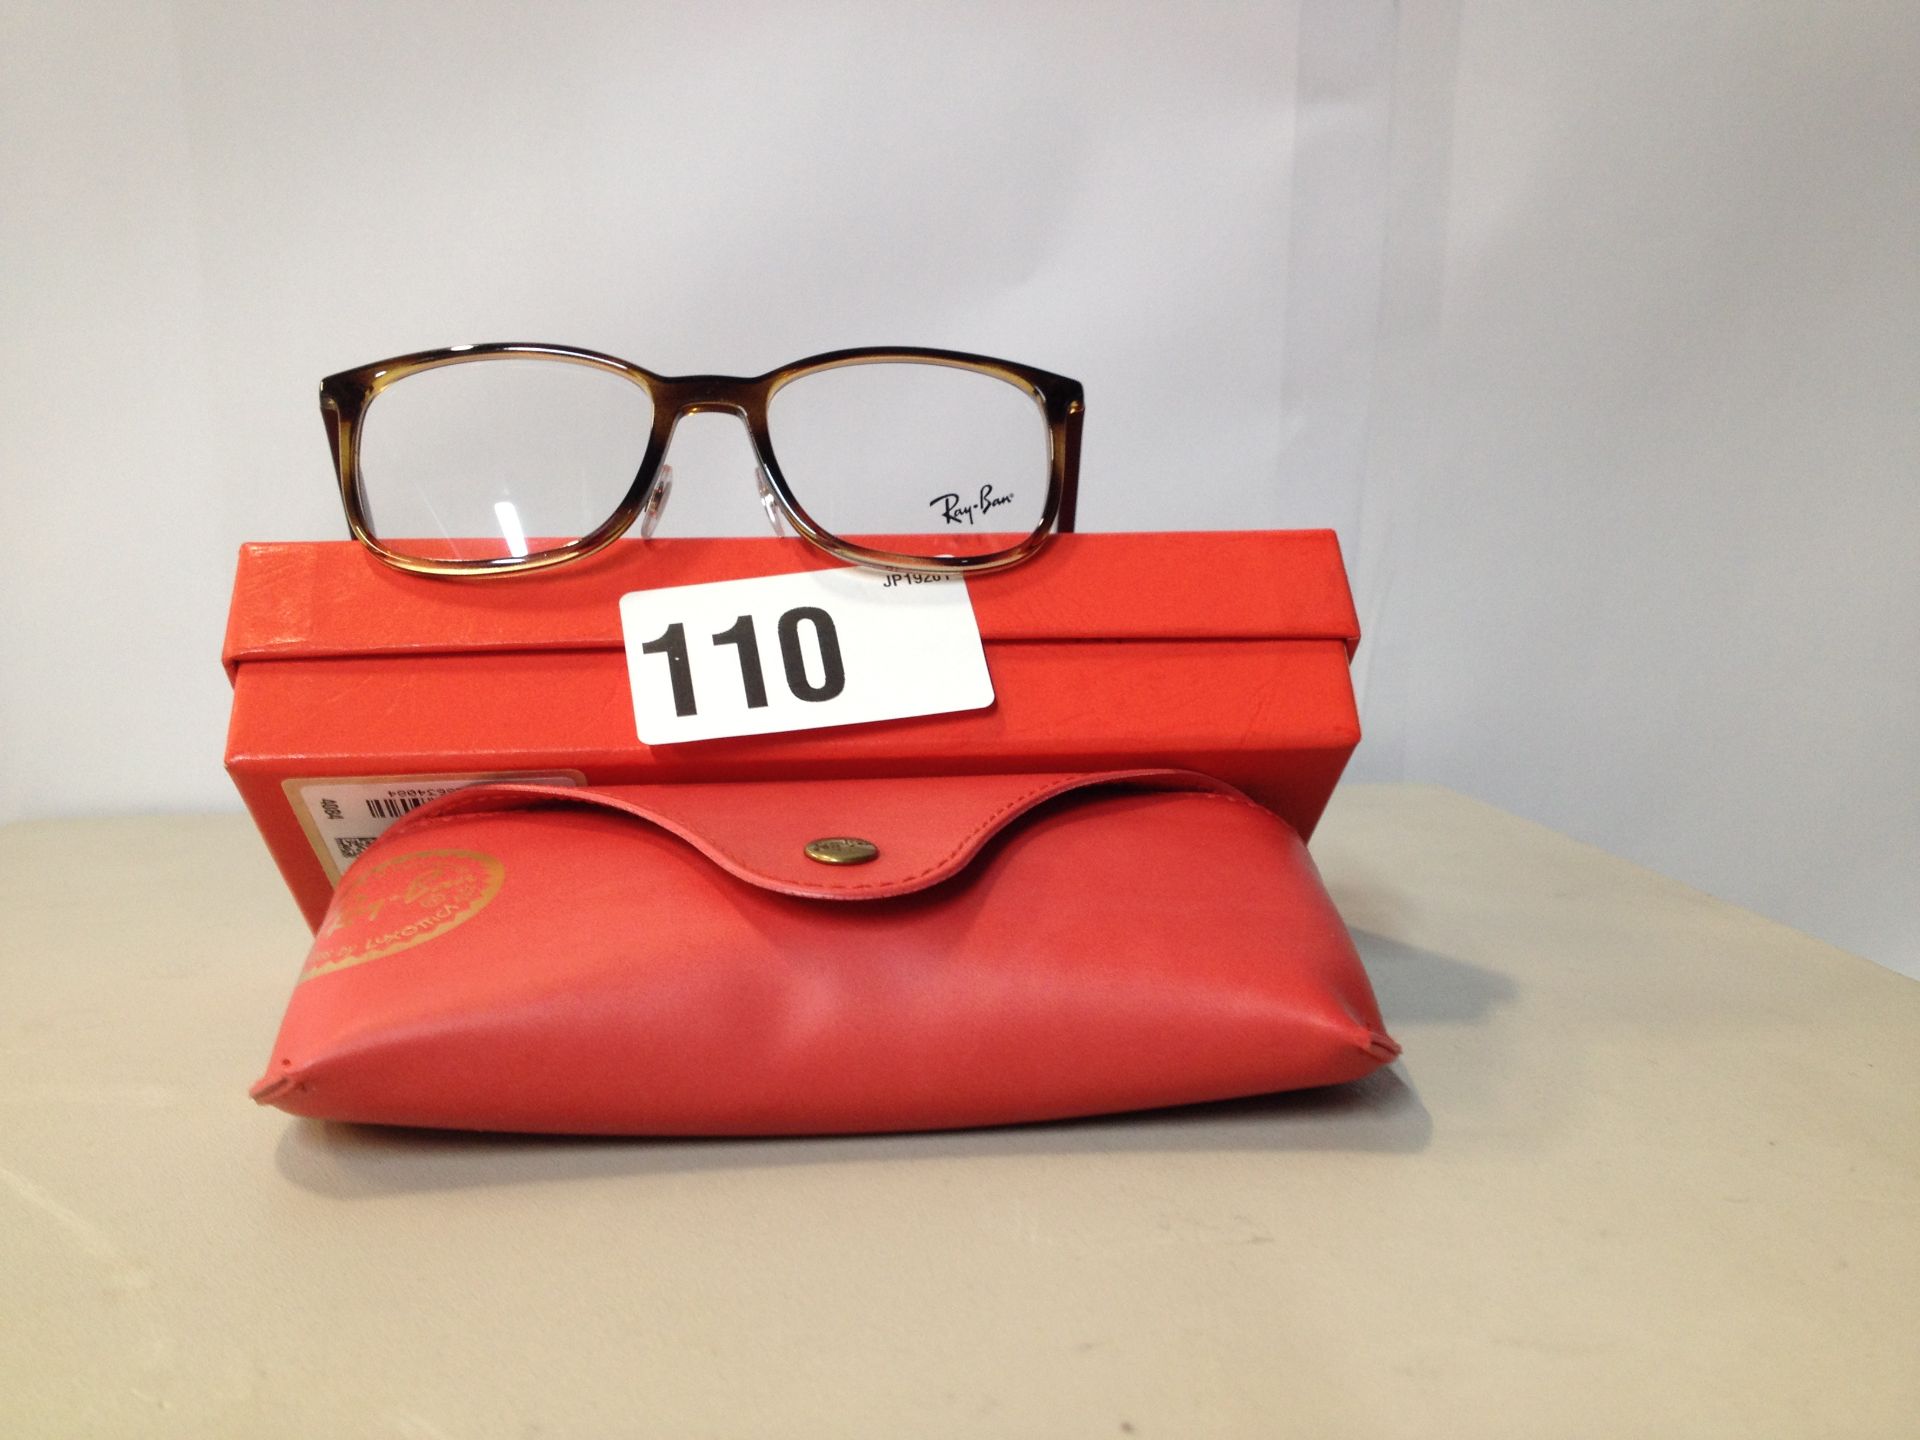 1x Pair of Ray Ban reading glasses